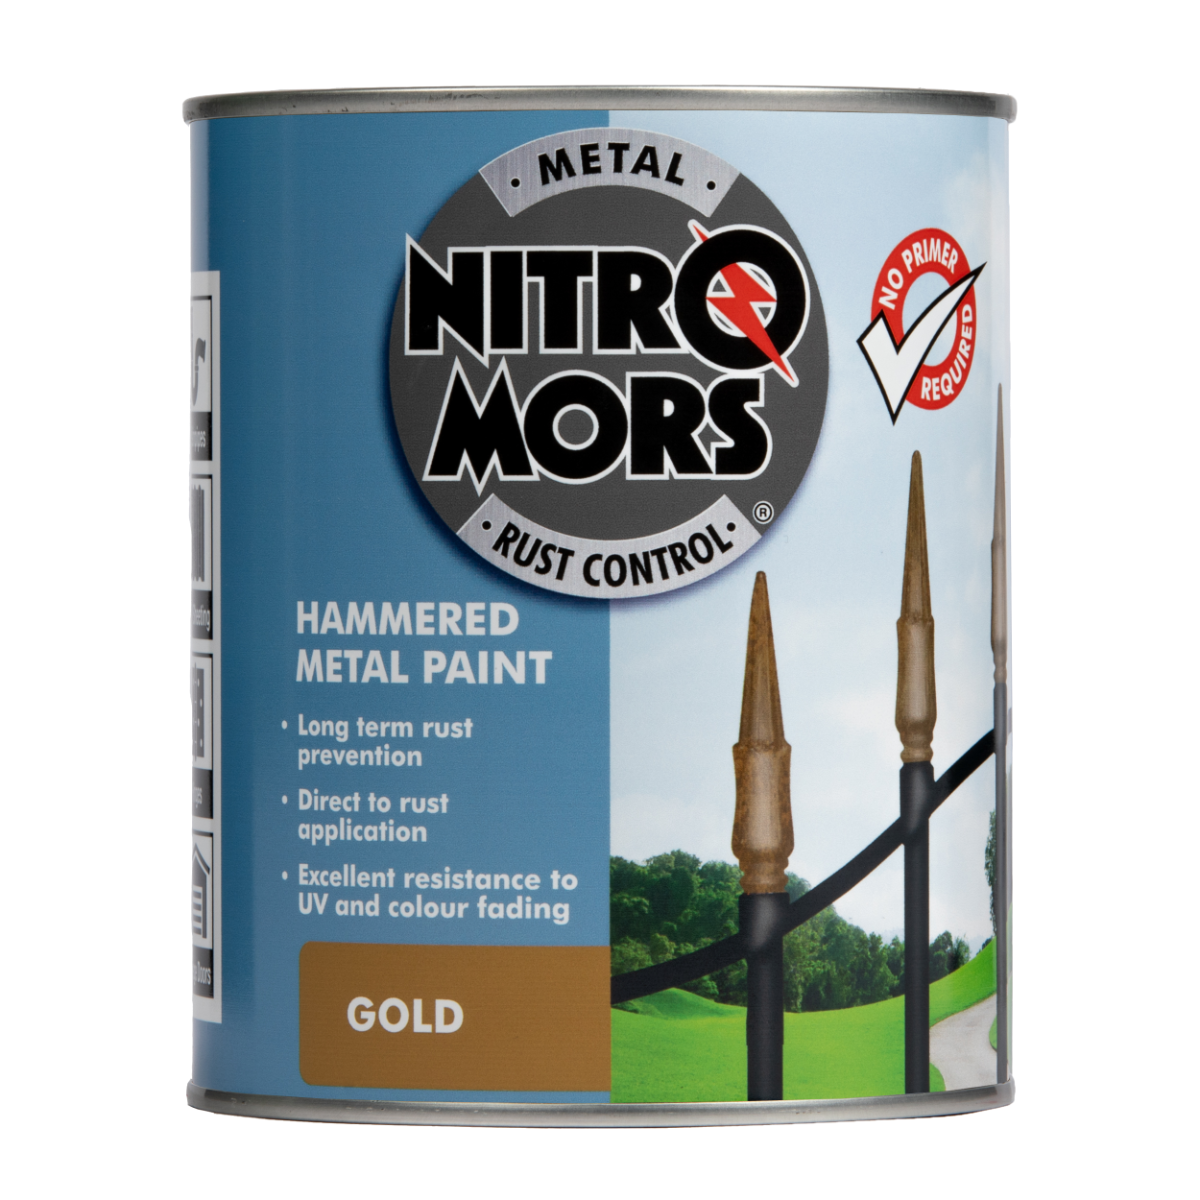 NGH750_Nitromors_Hammered_Metal_paint_gold_-_750ml_Front